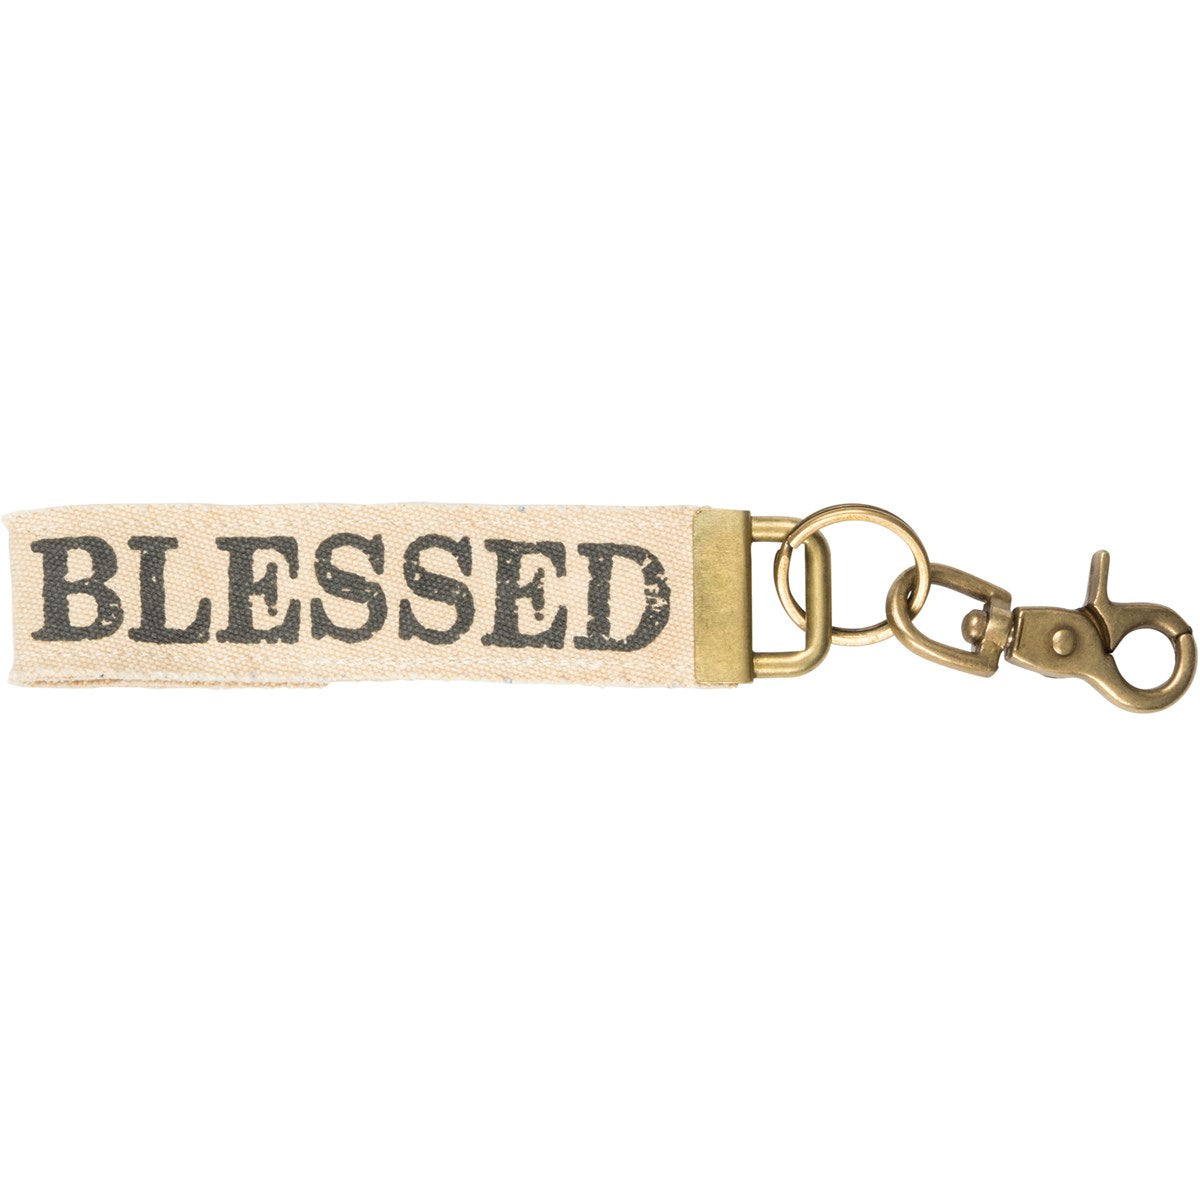 CANVAS KEY FOB - BLESSED